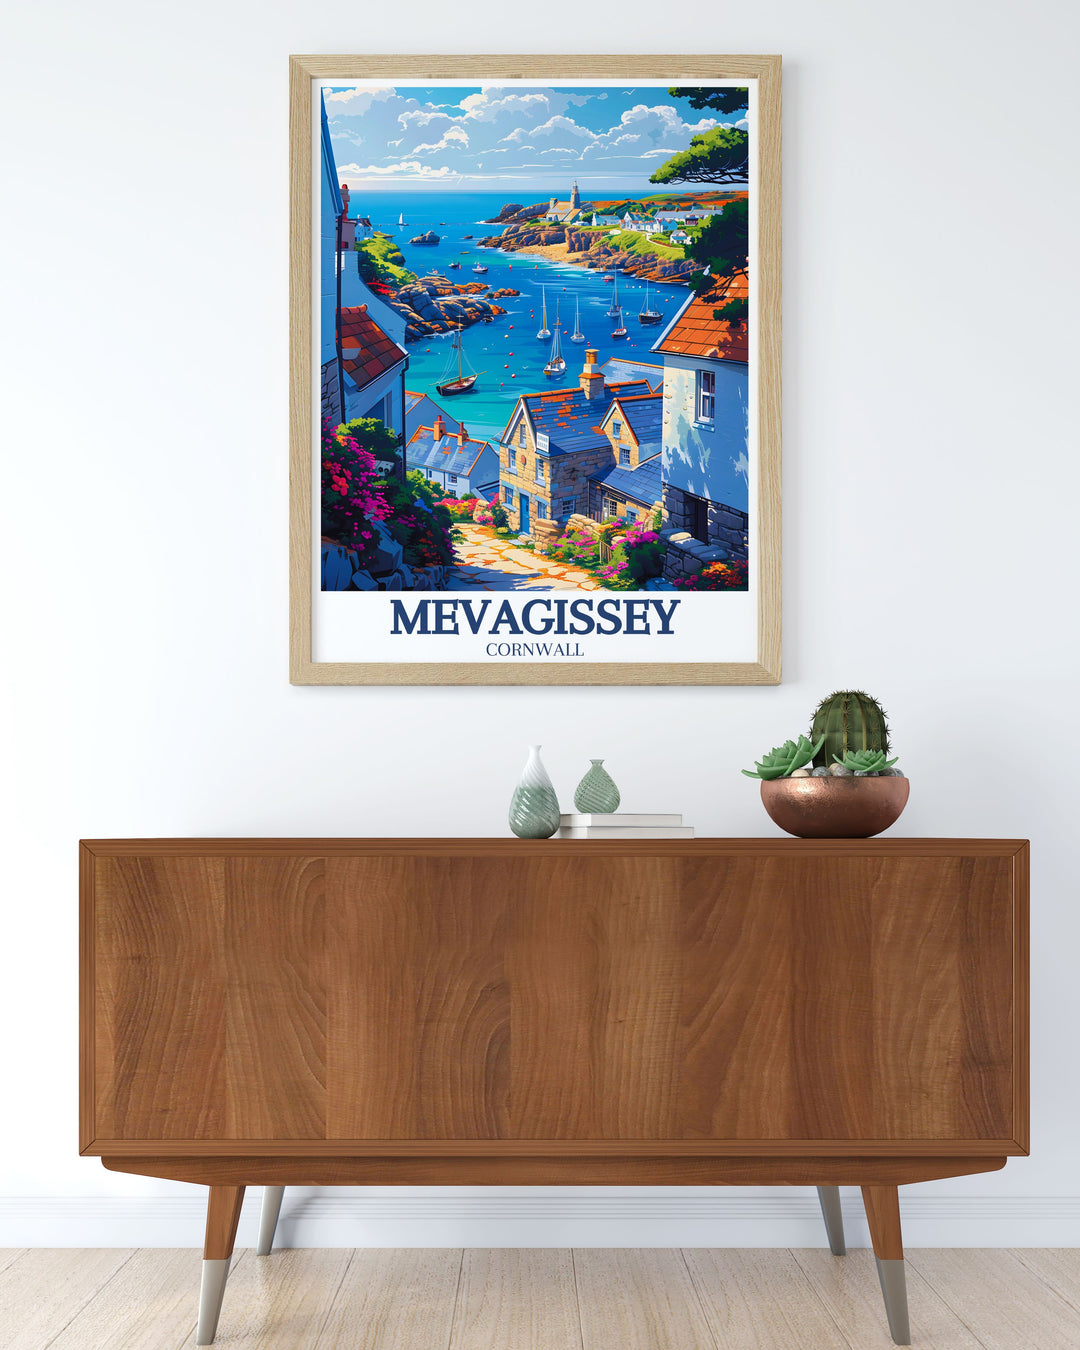 Explore the enchanting village of Mevagissey in Cornwall with this travel poster capturing its picturesque scenery. Ideal for those who love coastal beauty, this artwork showcases the vibrant harbor, colorful cottages, and narrow streets of Mevagissey.